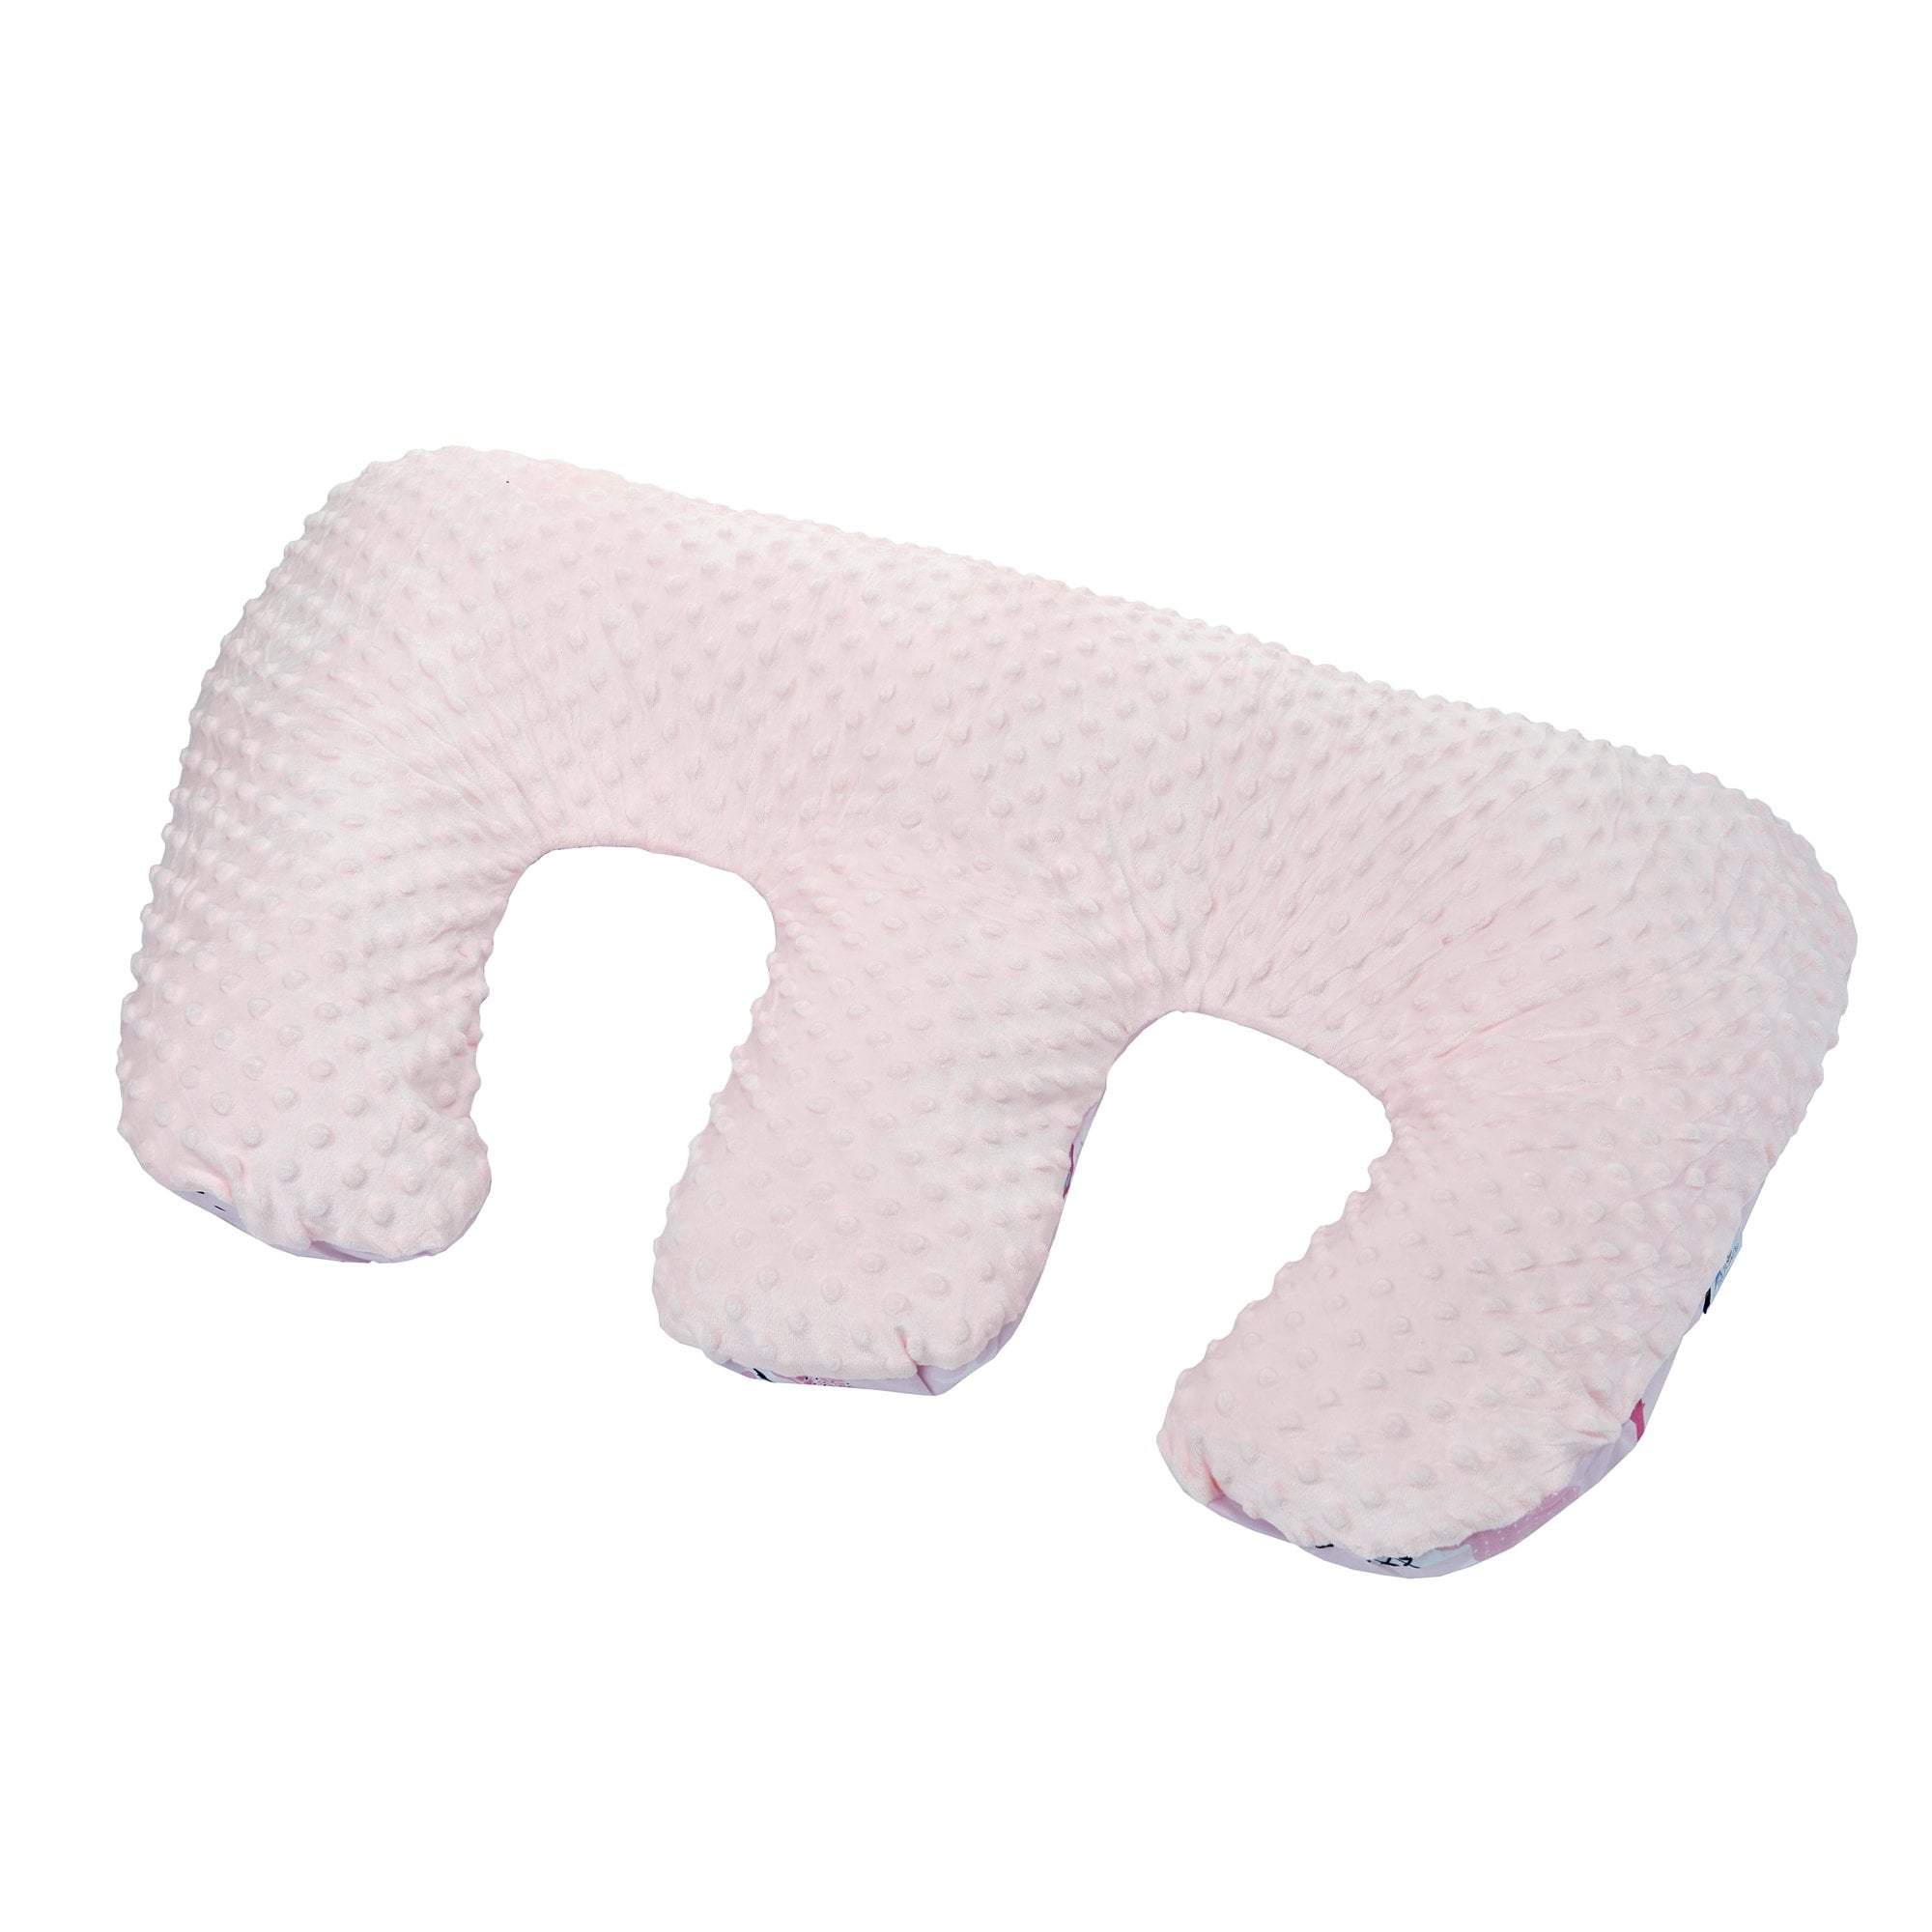 Twin Pregnancy Nursing Pillow - Pixie - For Your Little One